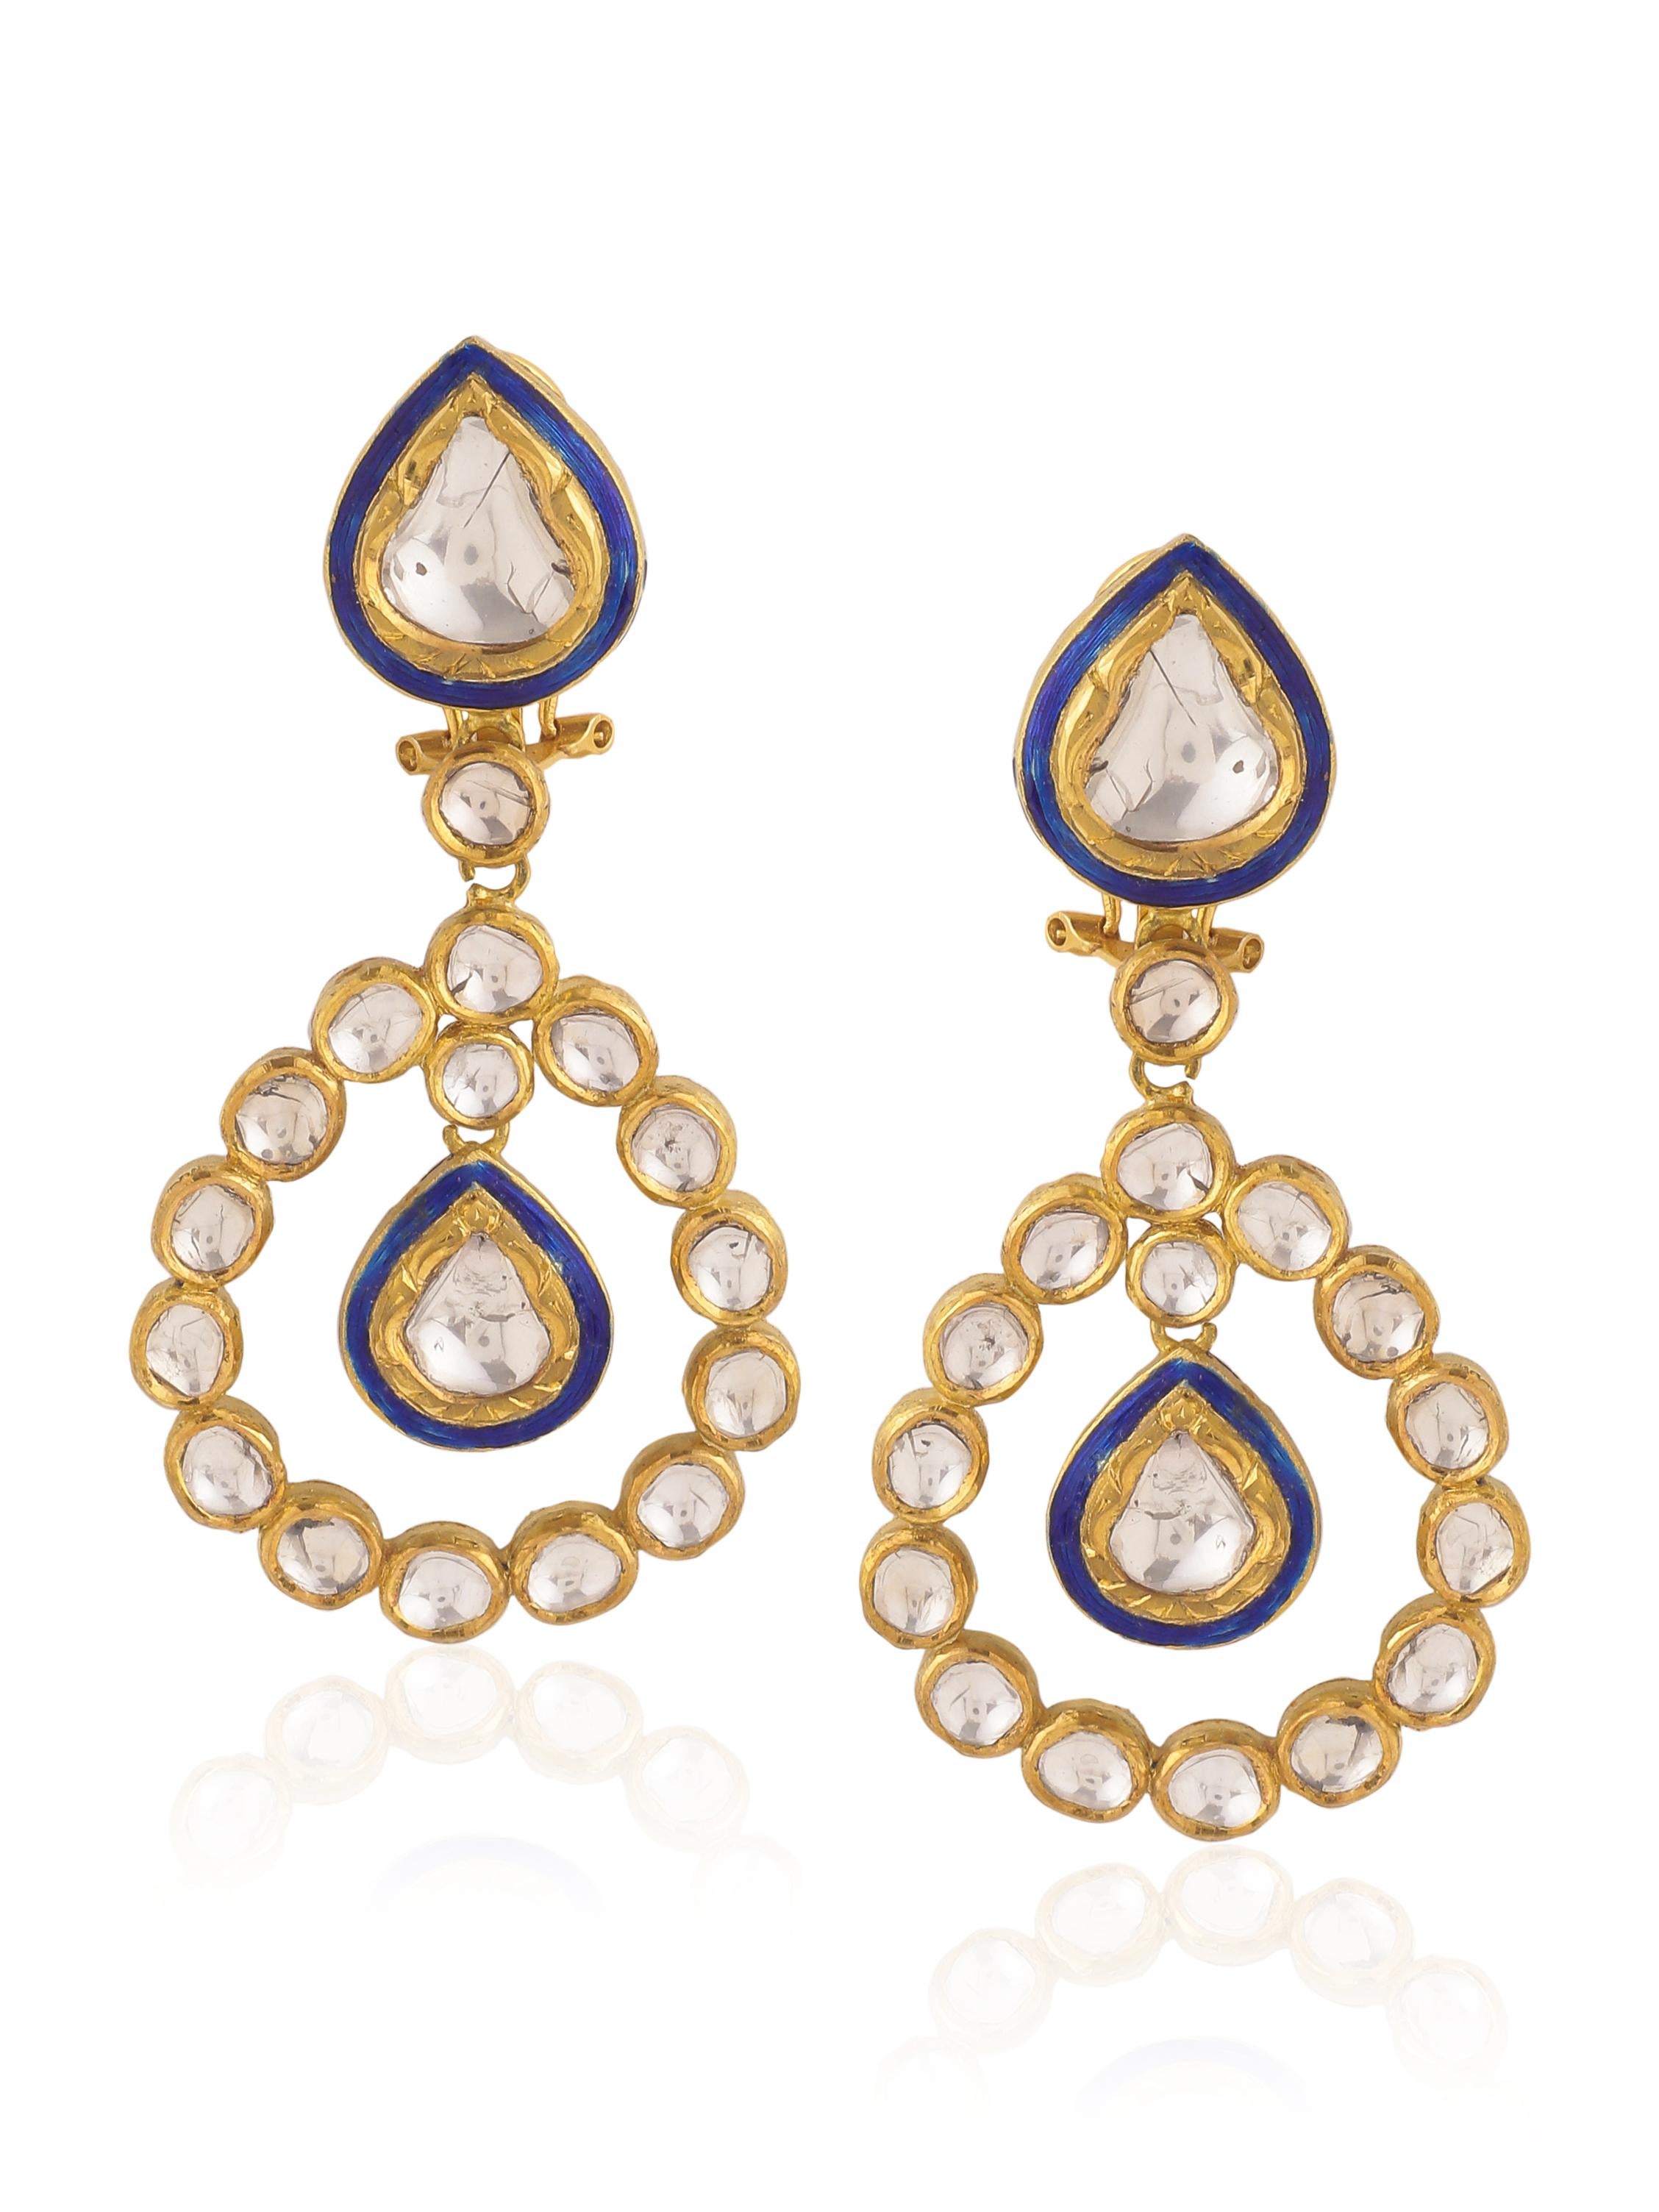 Art Deco Diamond Mughal Earring with Blue Enamel Handcrafted in 18K Gold